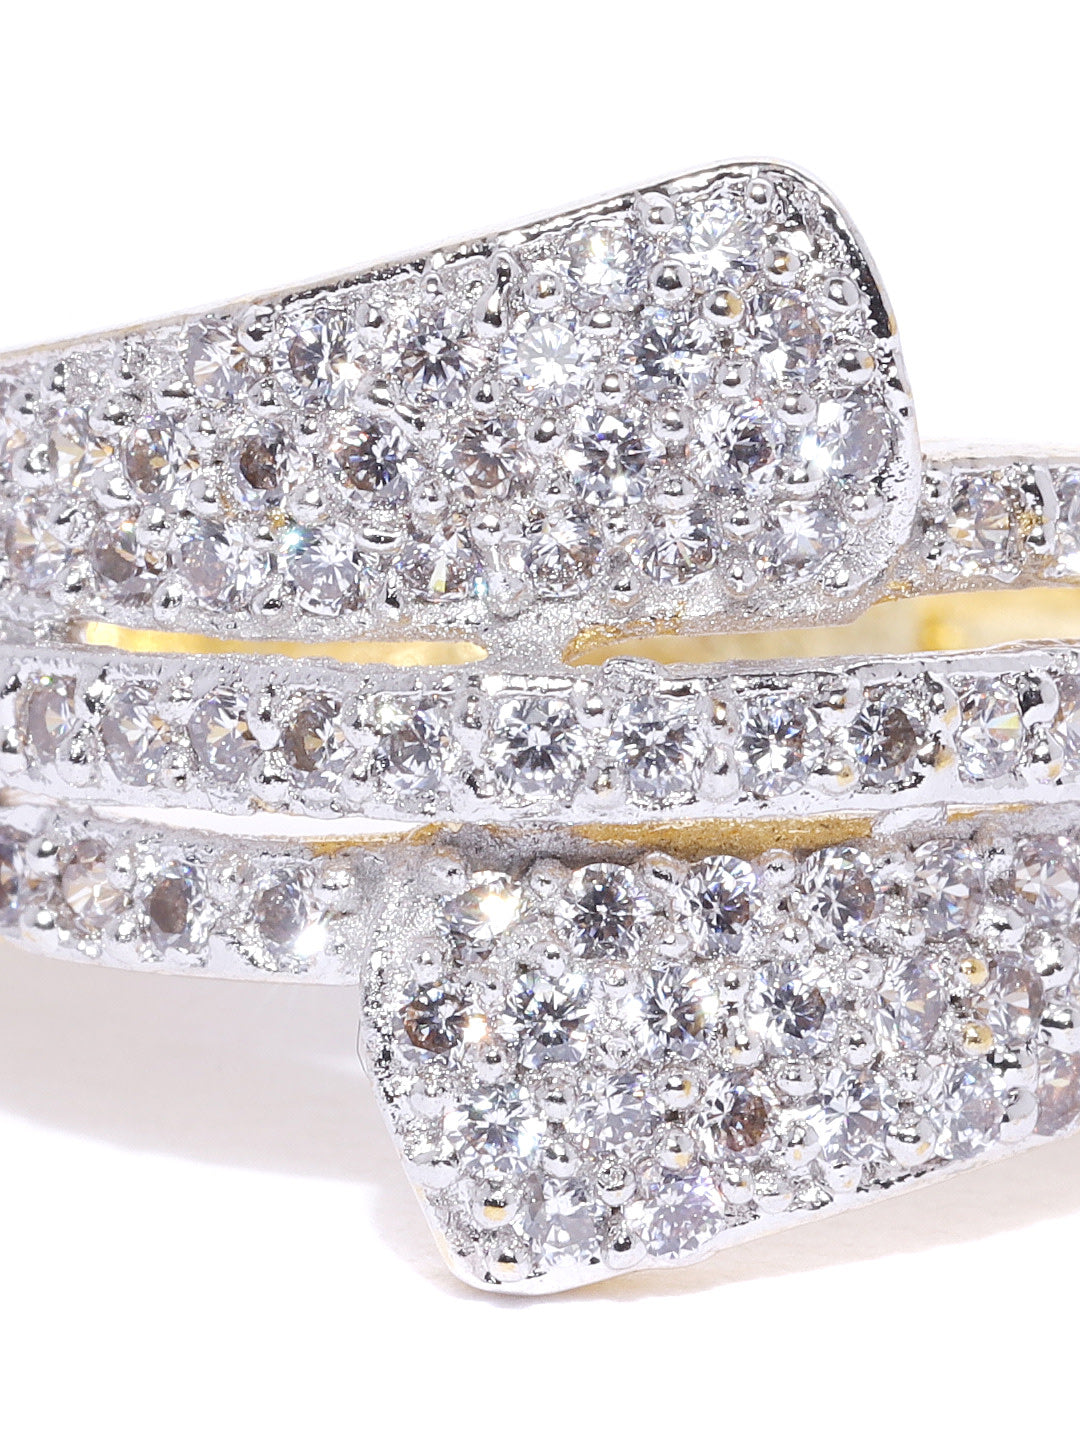 Gold-Plated American Diamond Studded Ring